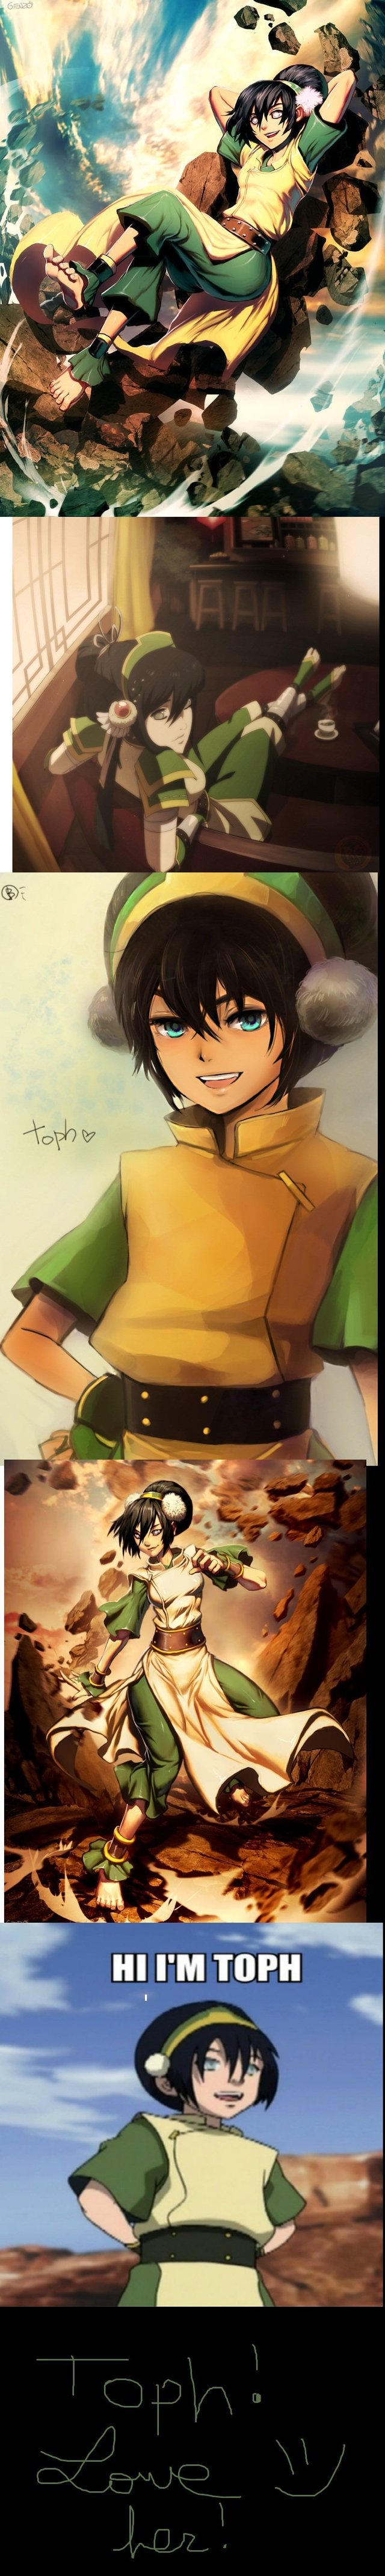 toph porn pictures funny dec favorite toph tribute mines